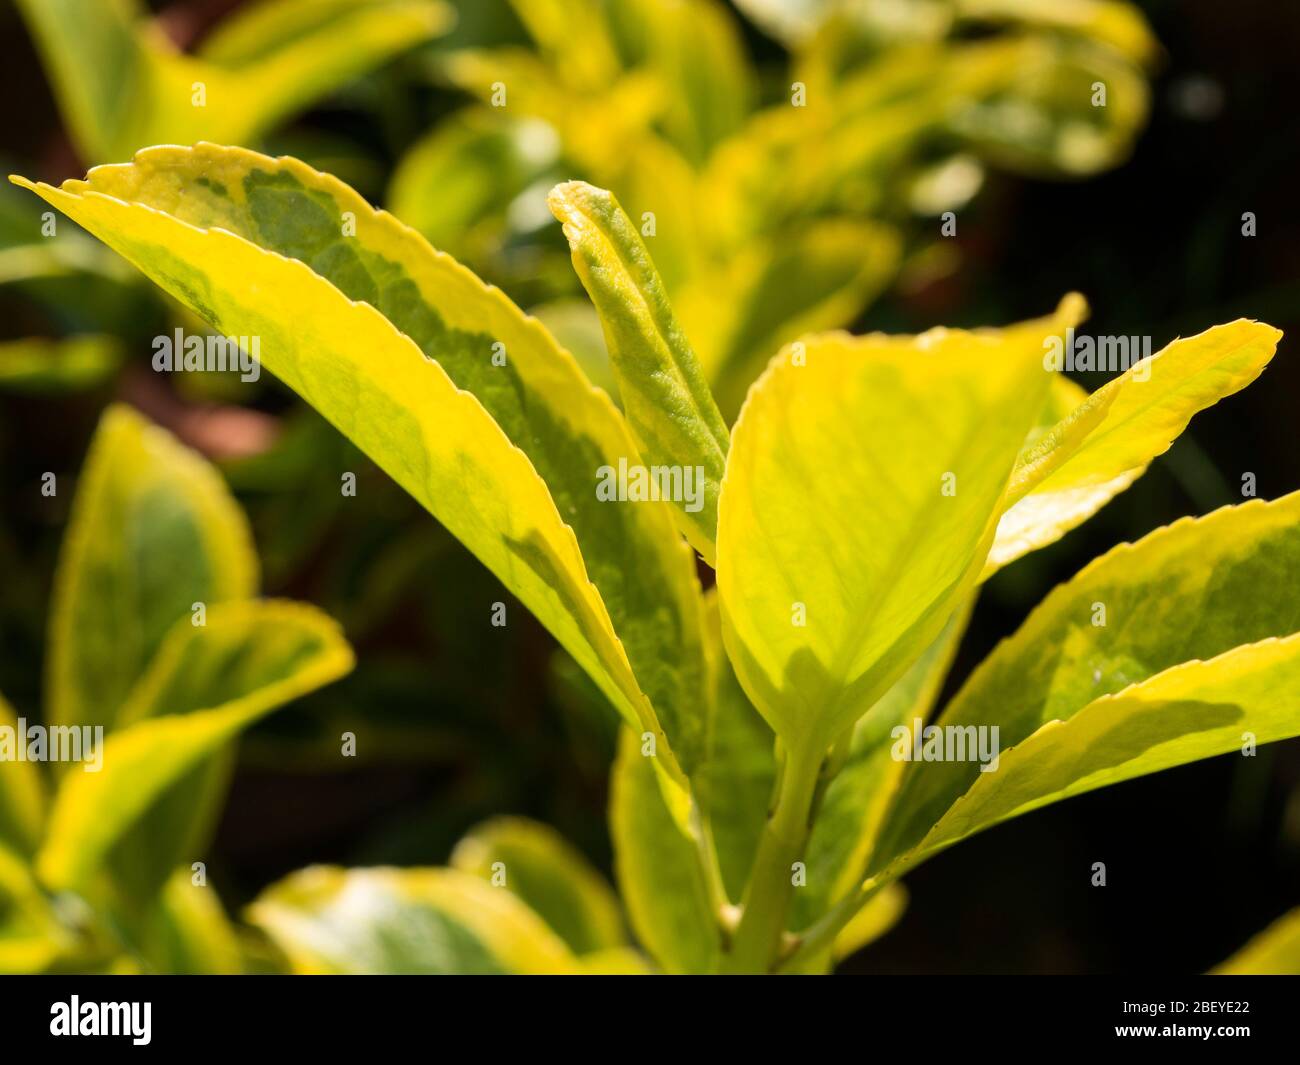 Yellow and green variegated euonymus leaves Stock Photo